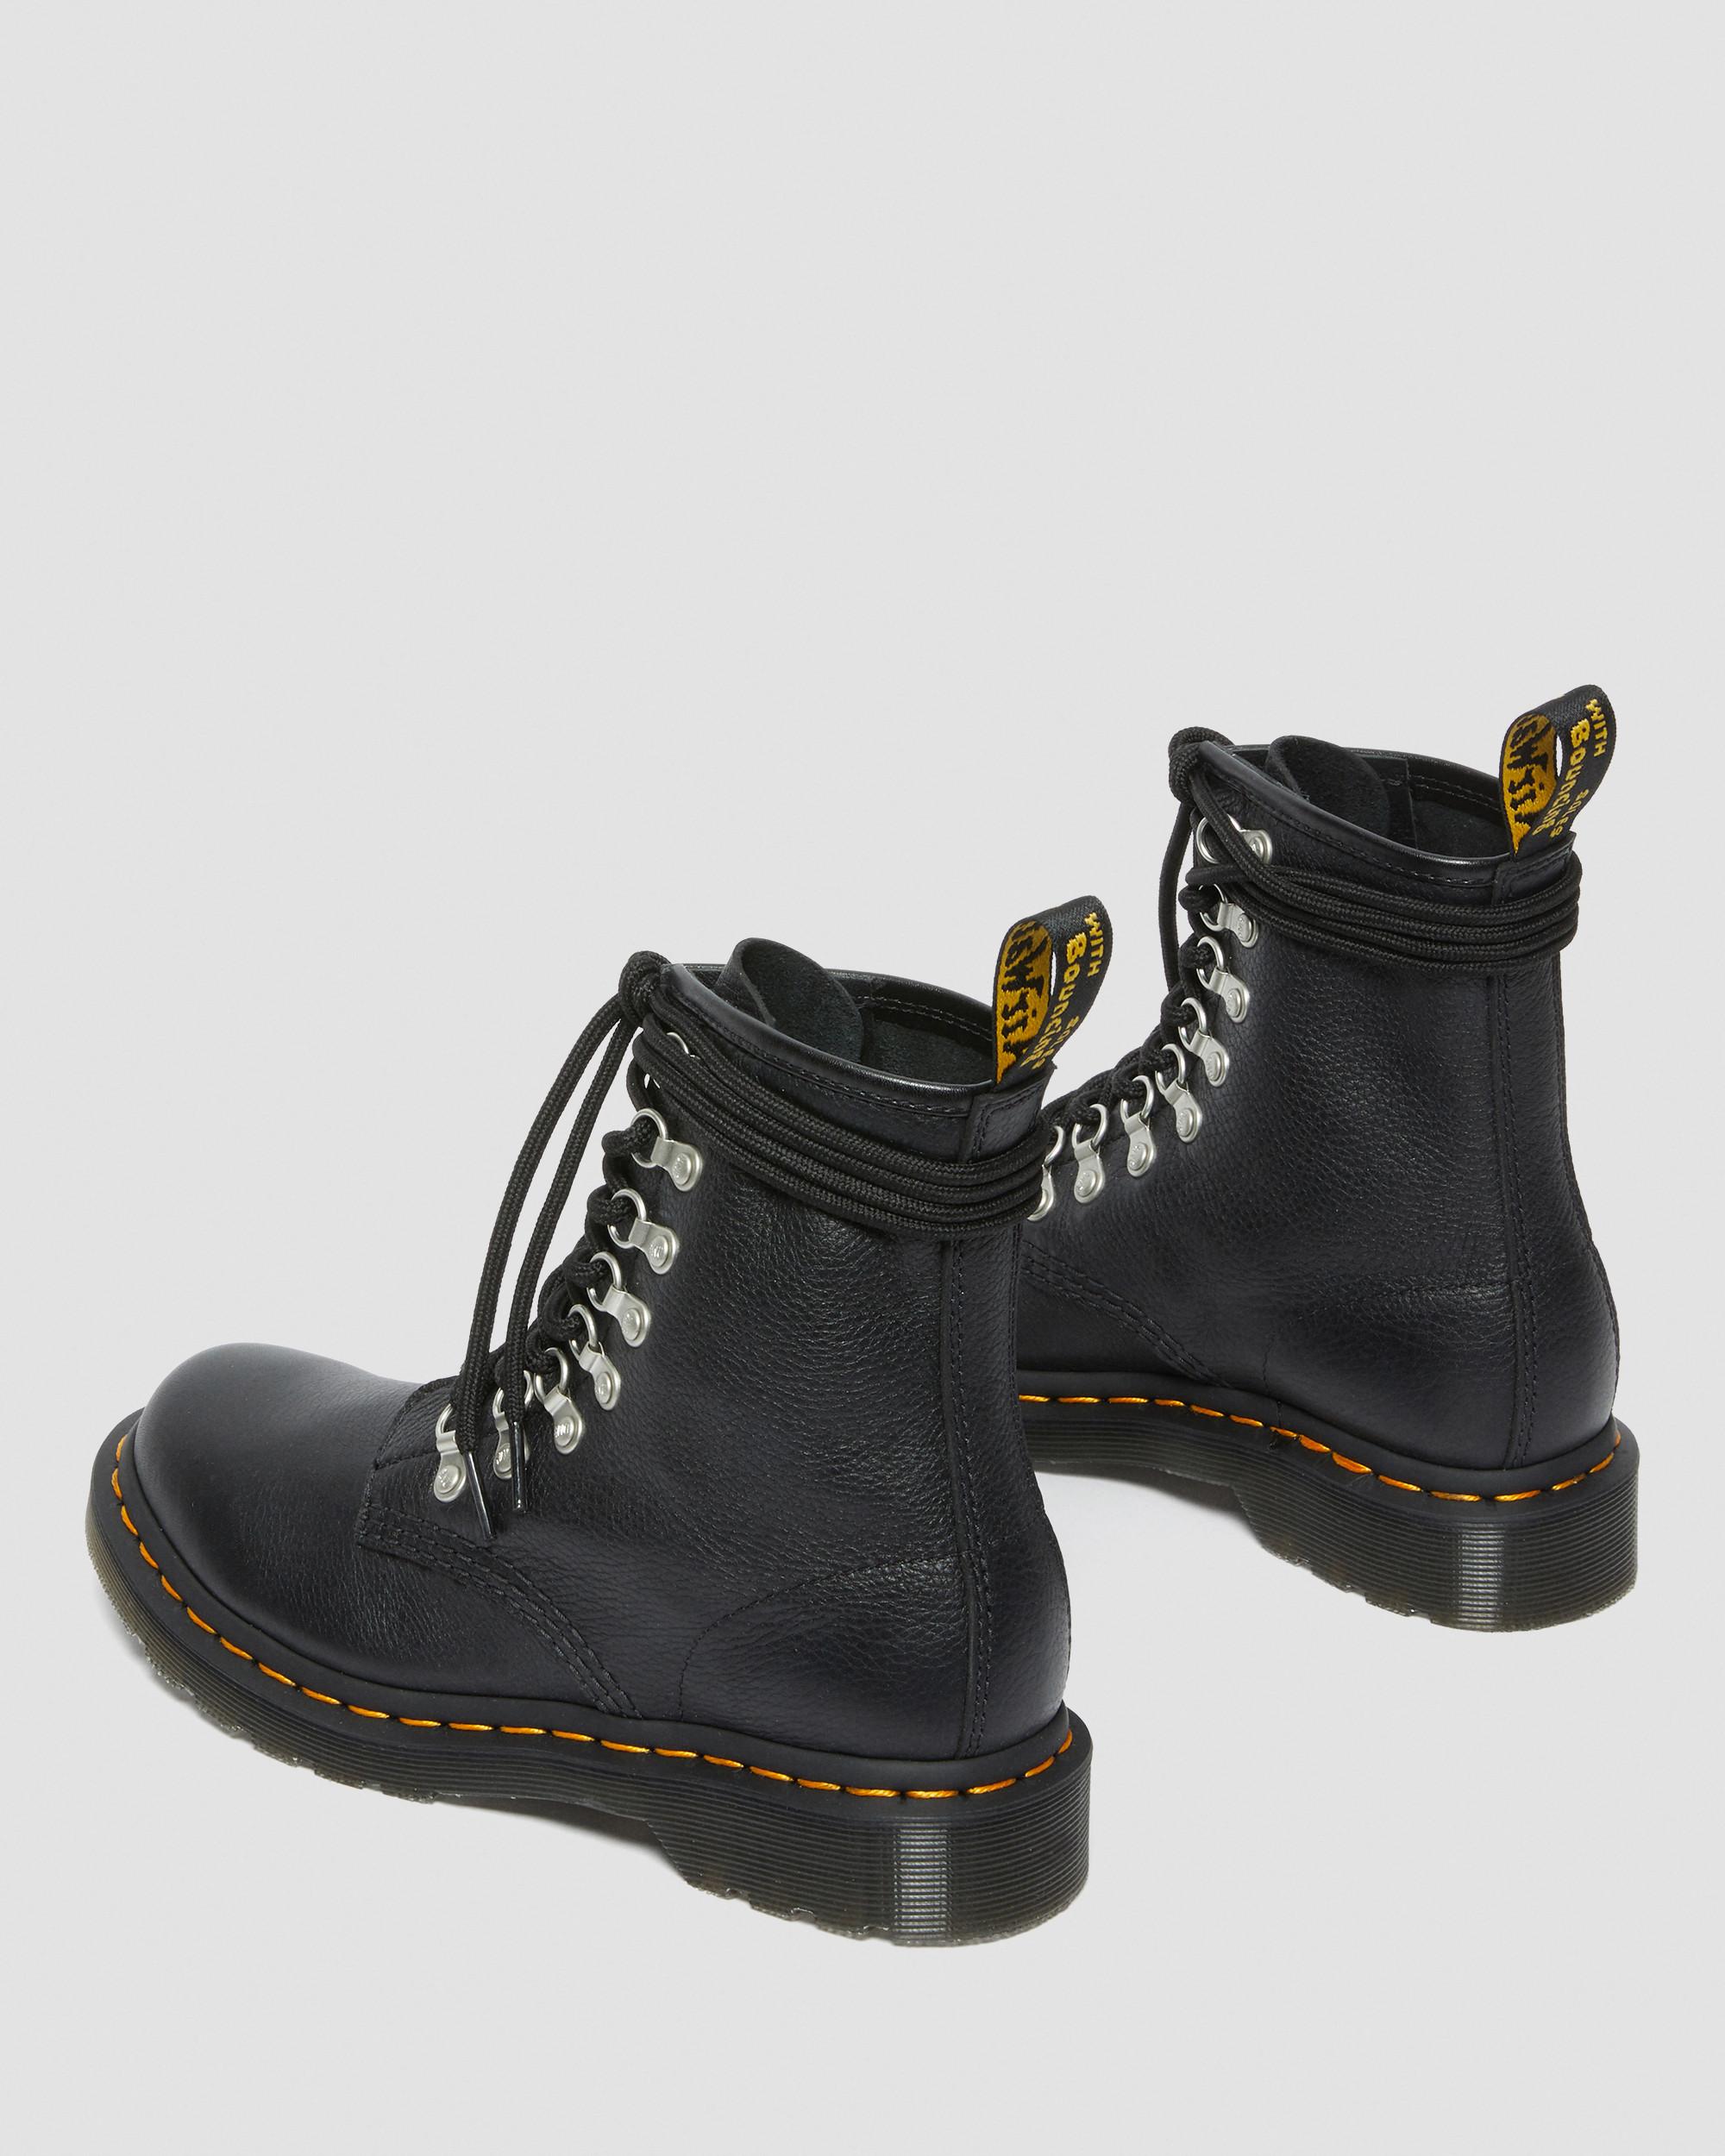 1460 Laced Virginia Leather Lace Up Boots, Black | Dr. Martens